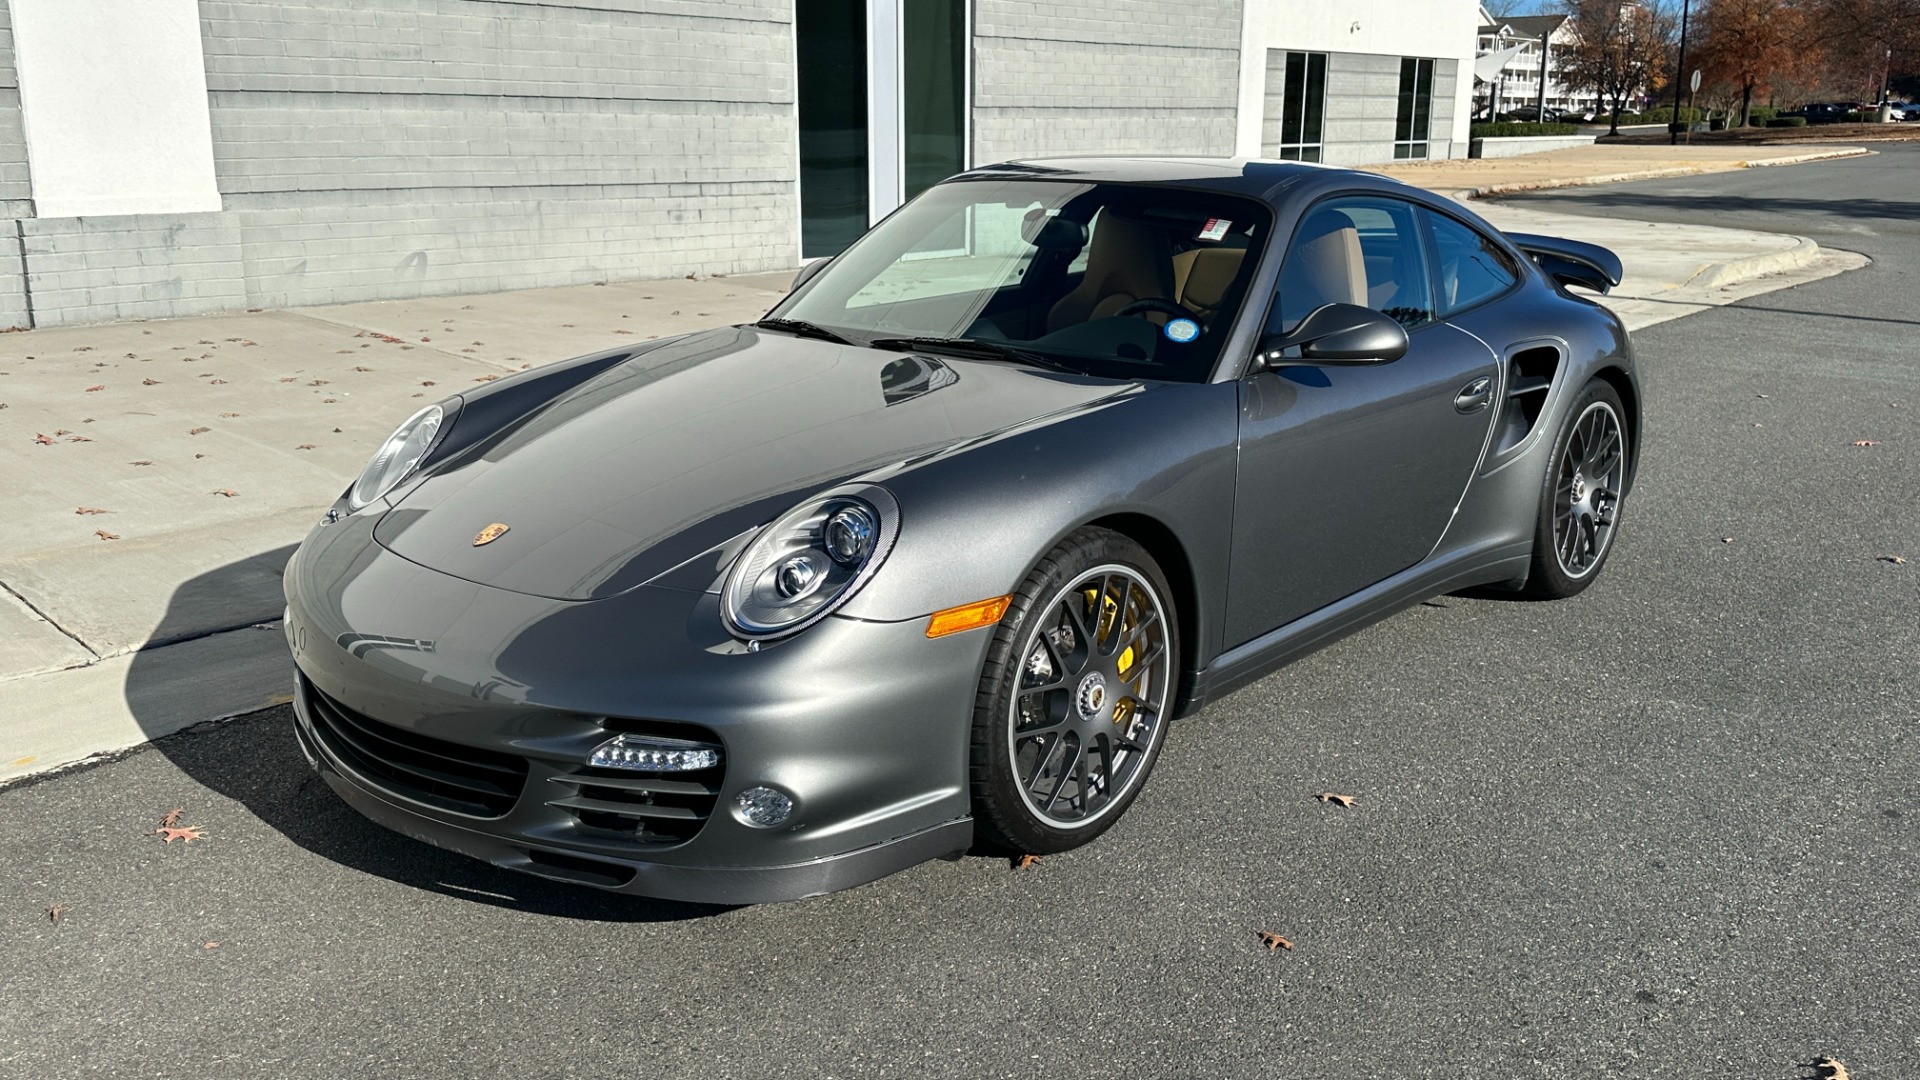 Used 2012 Porsche 911 TURBO S / CENTER LOCK WHEELS / FULL LEATHER INTERIOR / YELLOW CALIPERS / PA for sale $138,999 at Formula Imports in Charlotte NC 28227 2